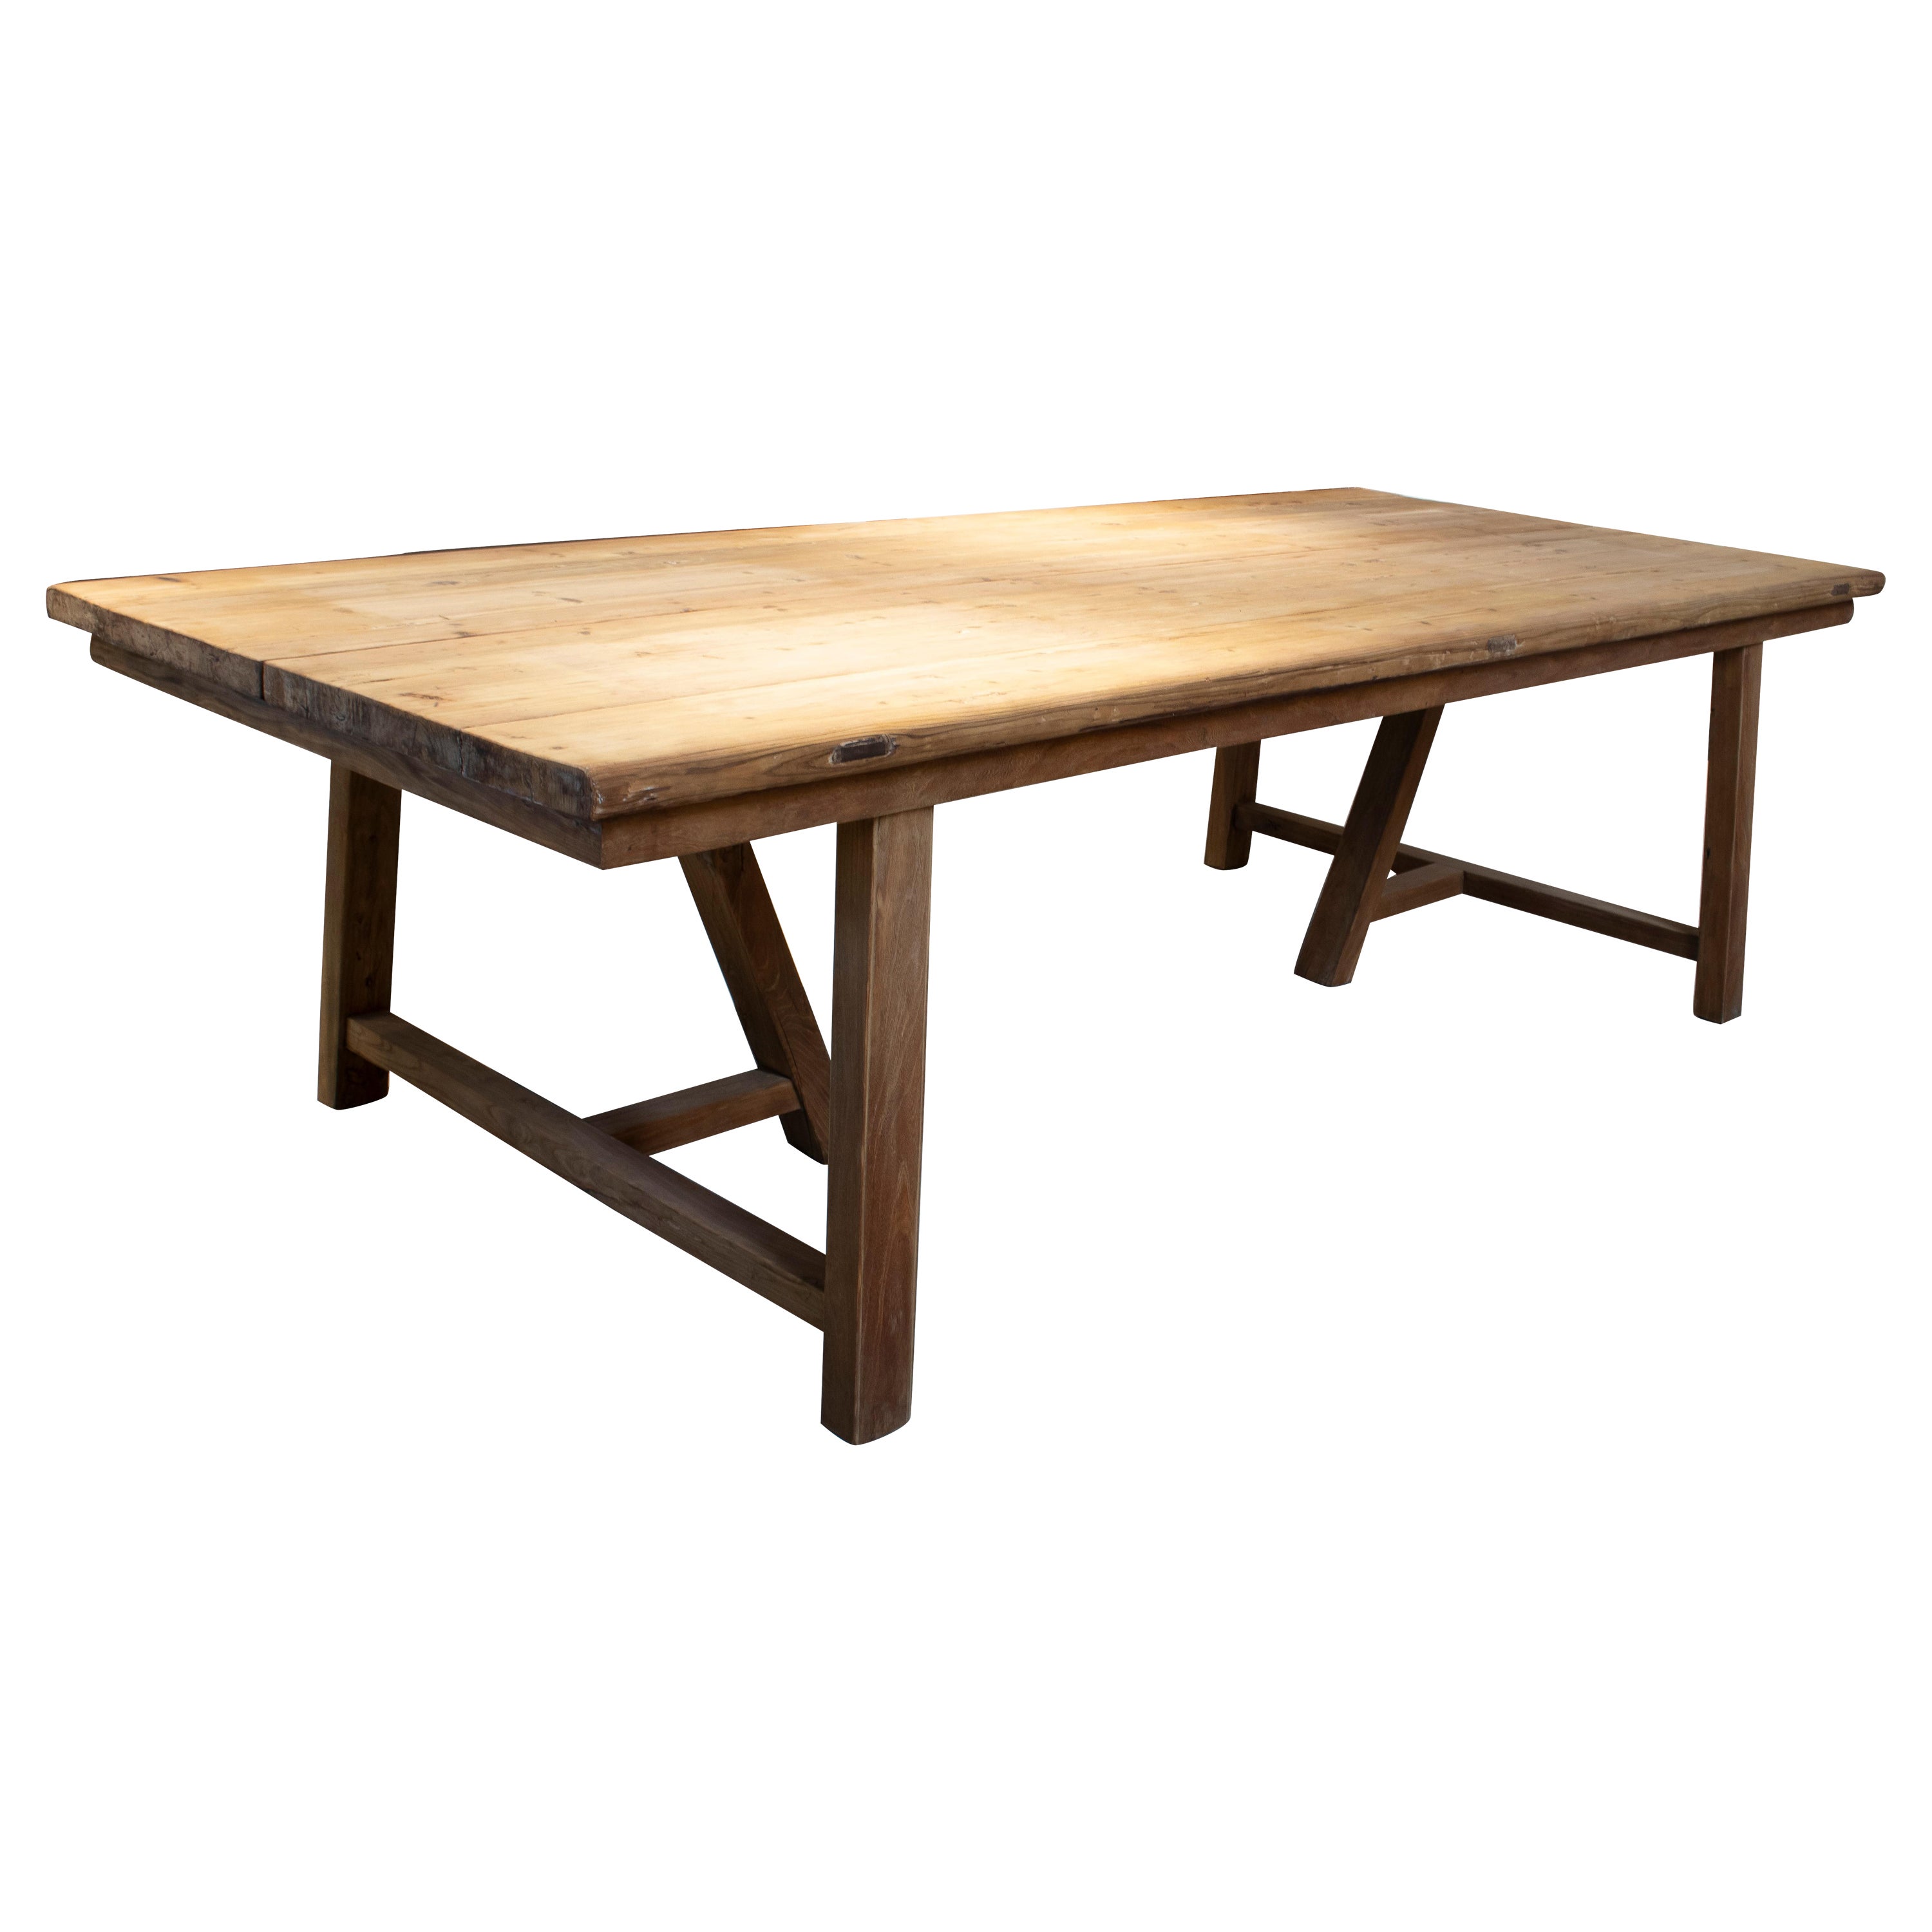 1970s Spanish Lime Washed Elm Wood Farmhouse Dining Table